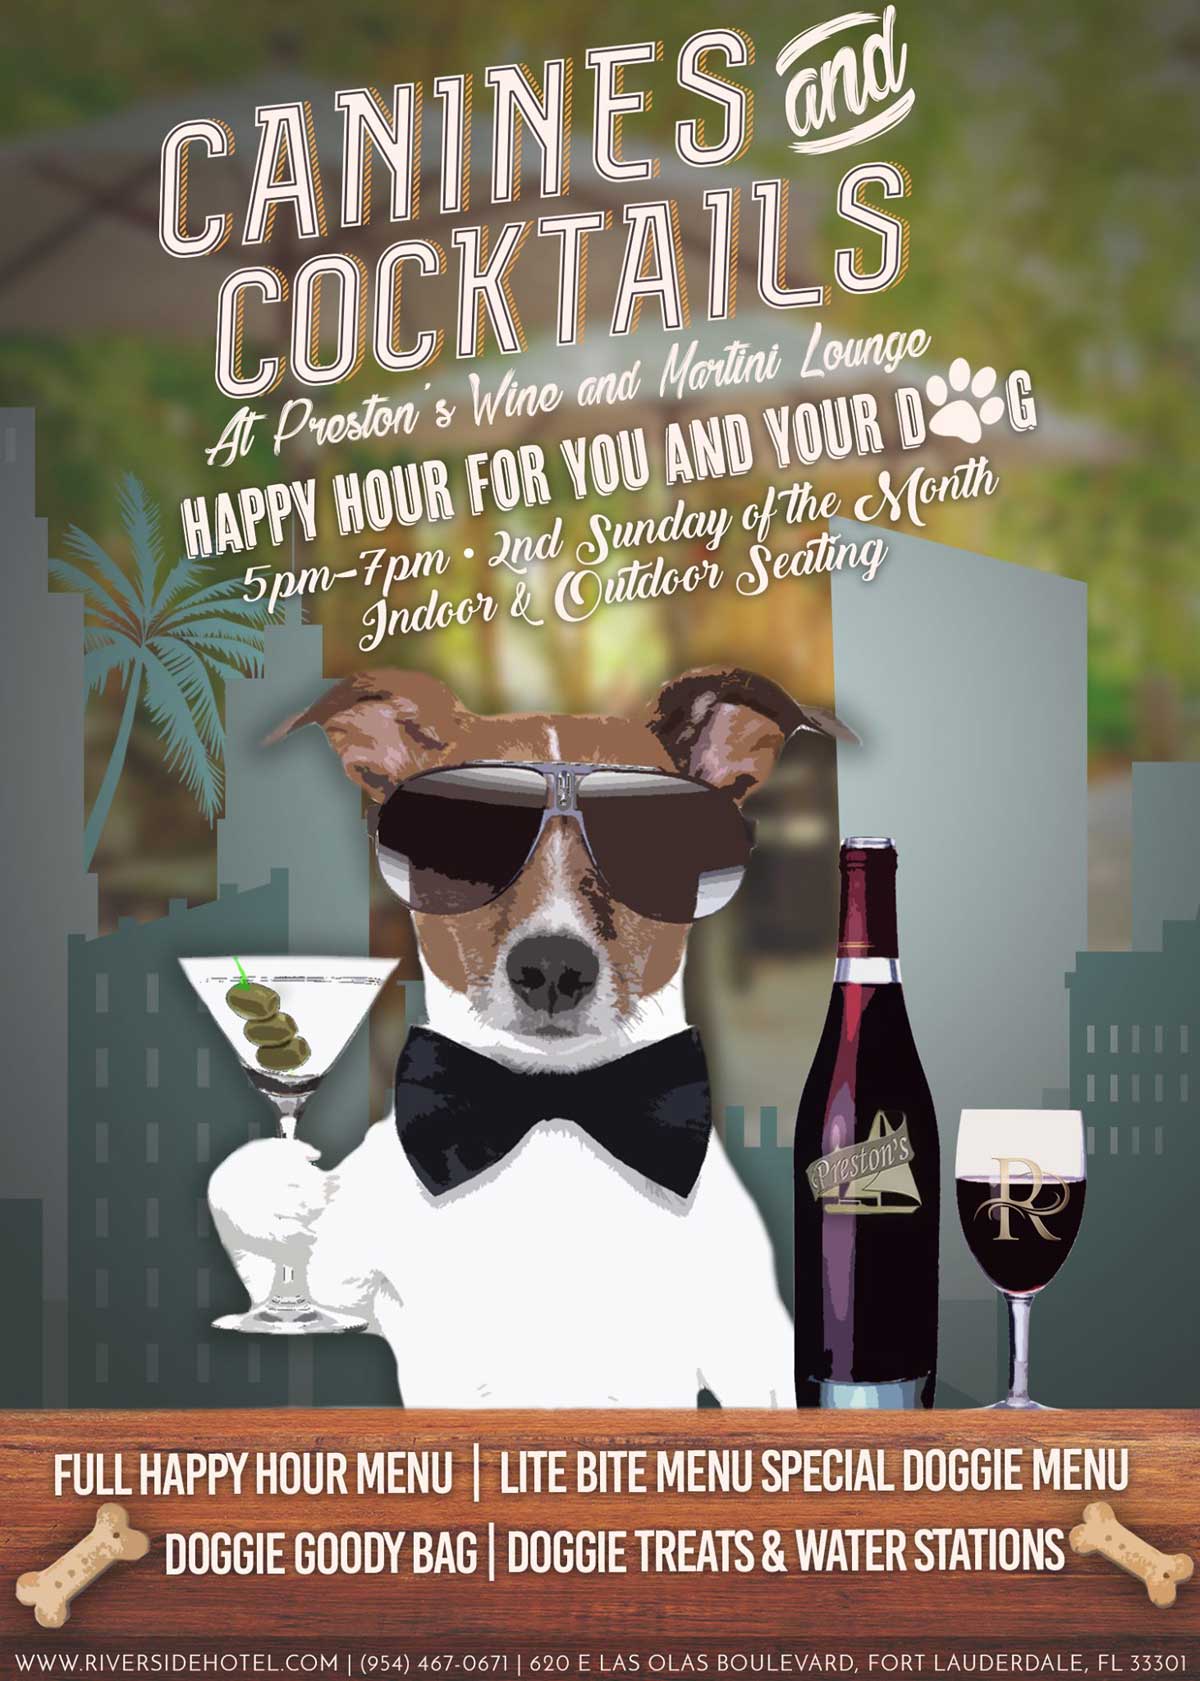 Canines & Cocktails Happy Hour at Preston’s Lounge | The Riverside Hotel